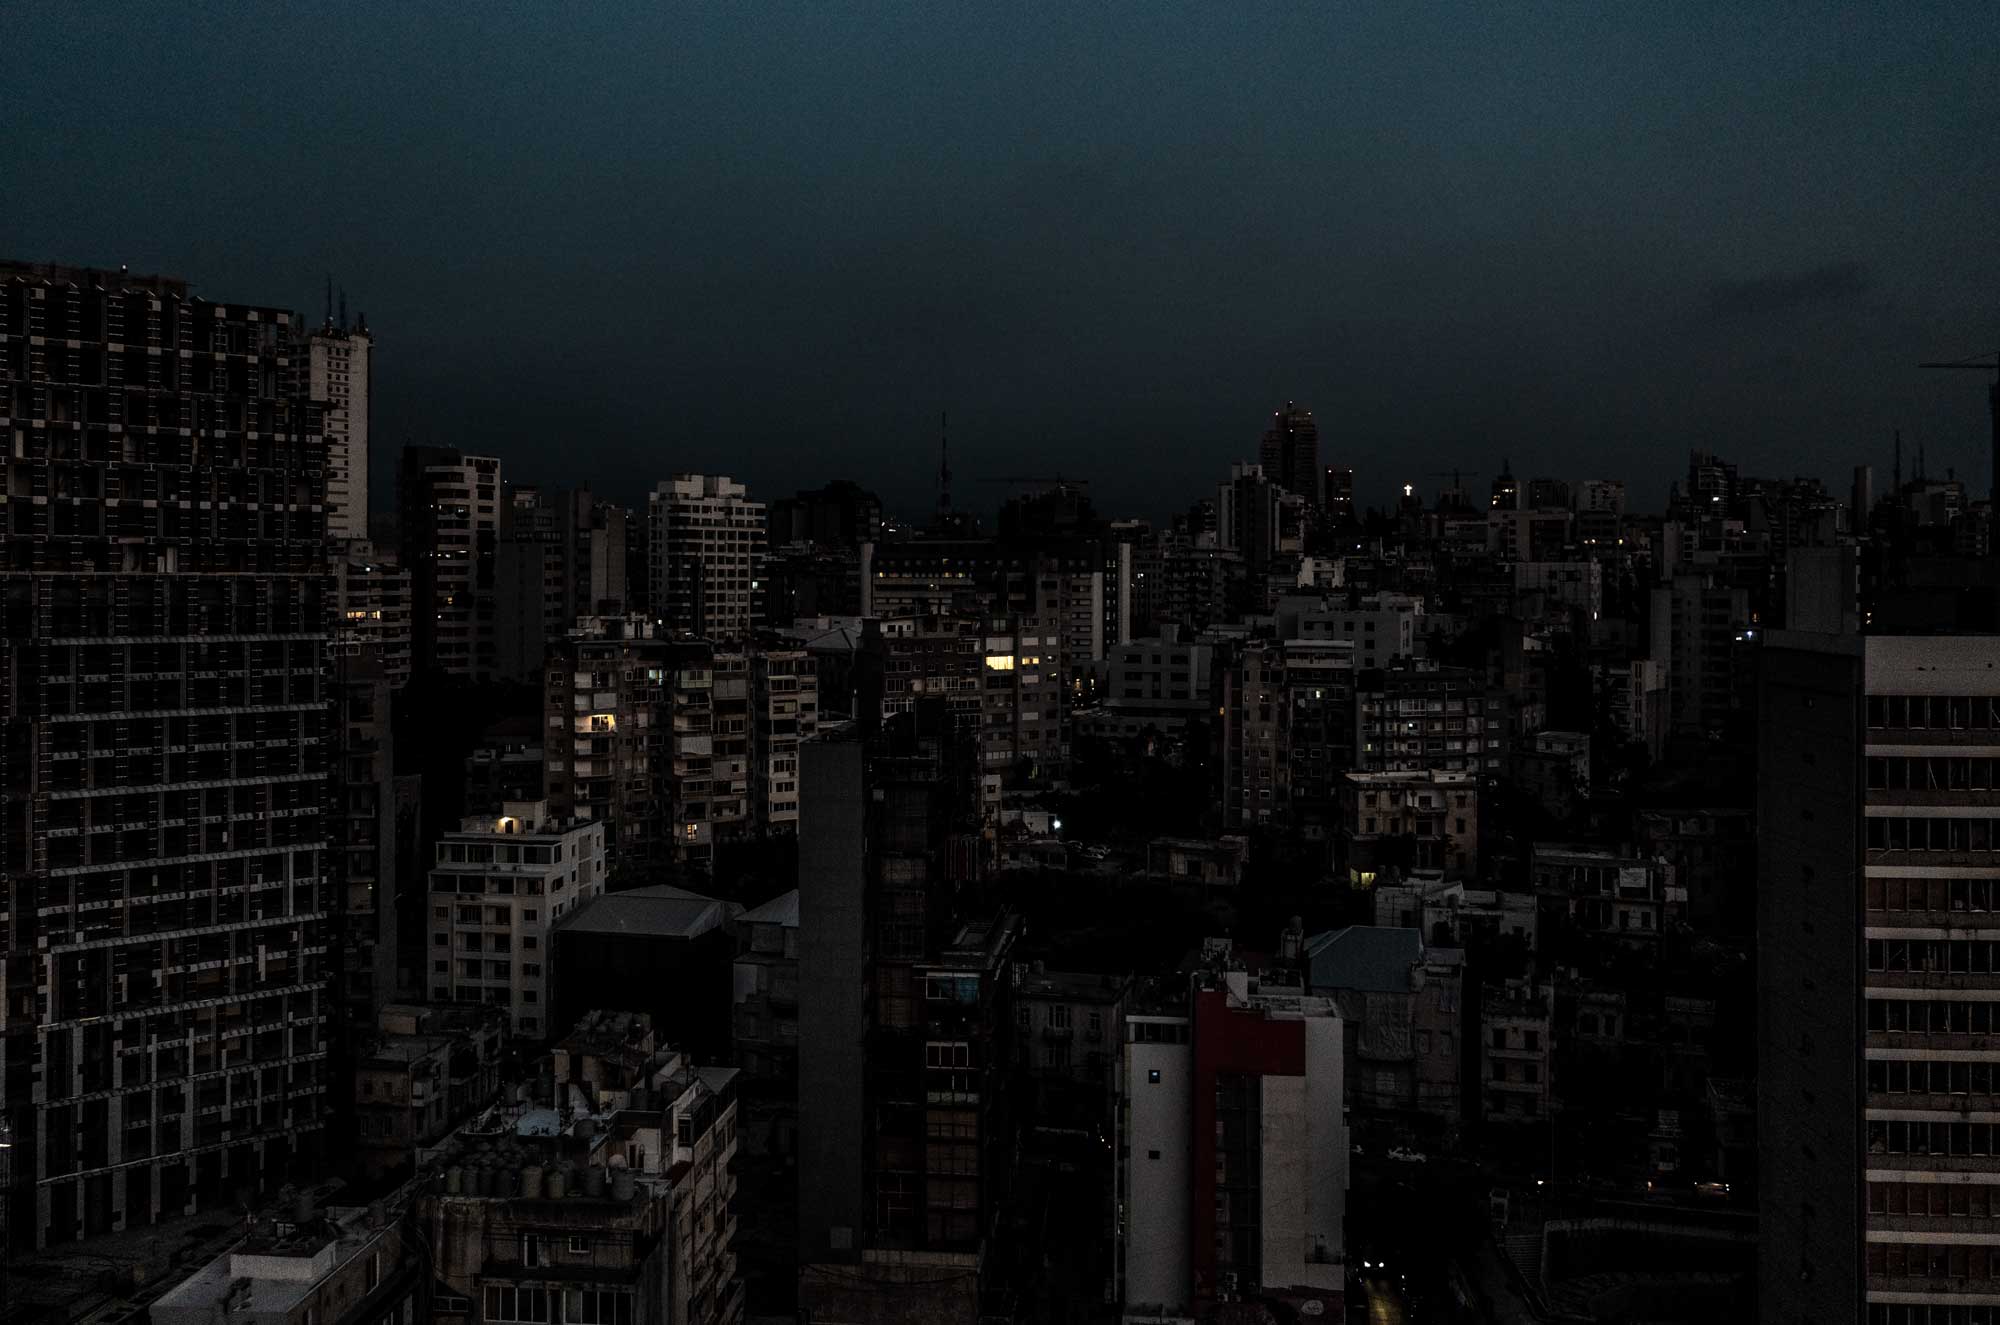 Beirut in darkness due to the energy crisis and post Beirut port explosion, 2021.